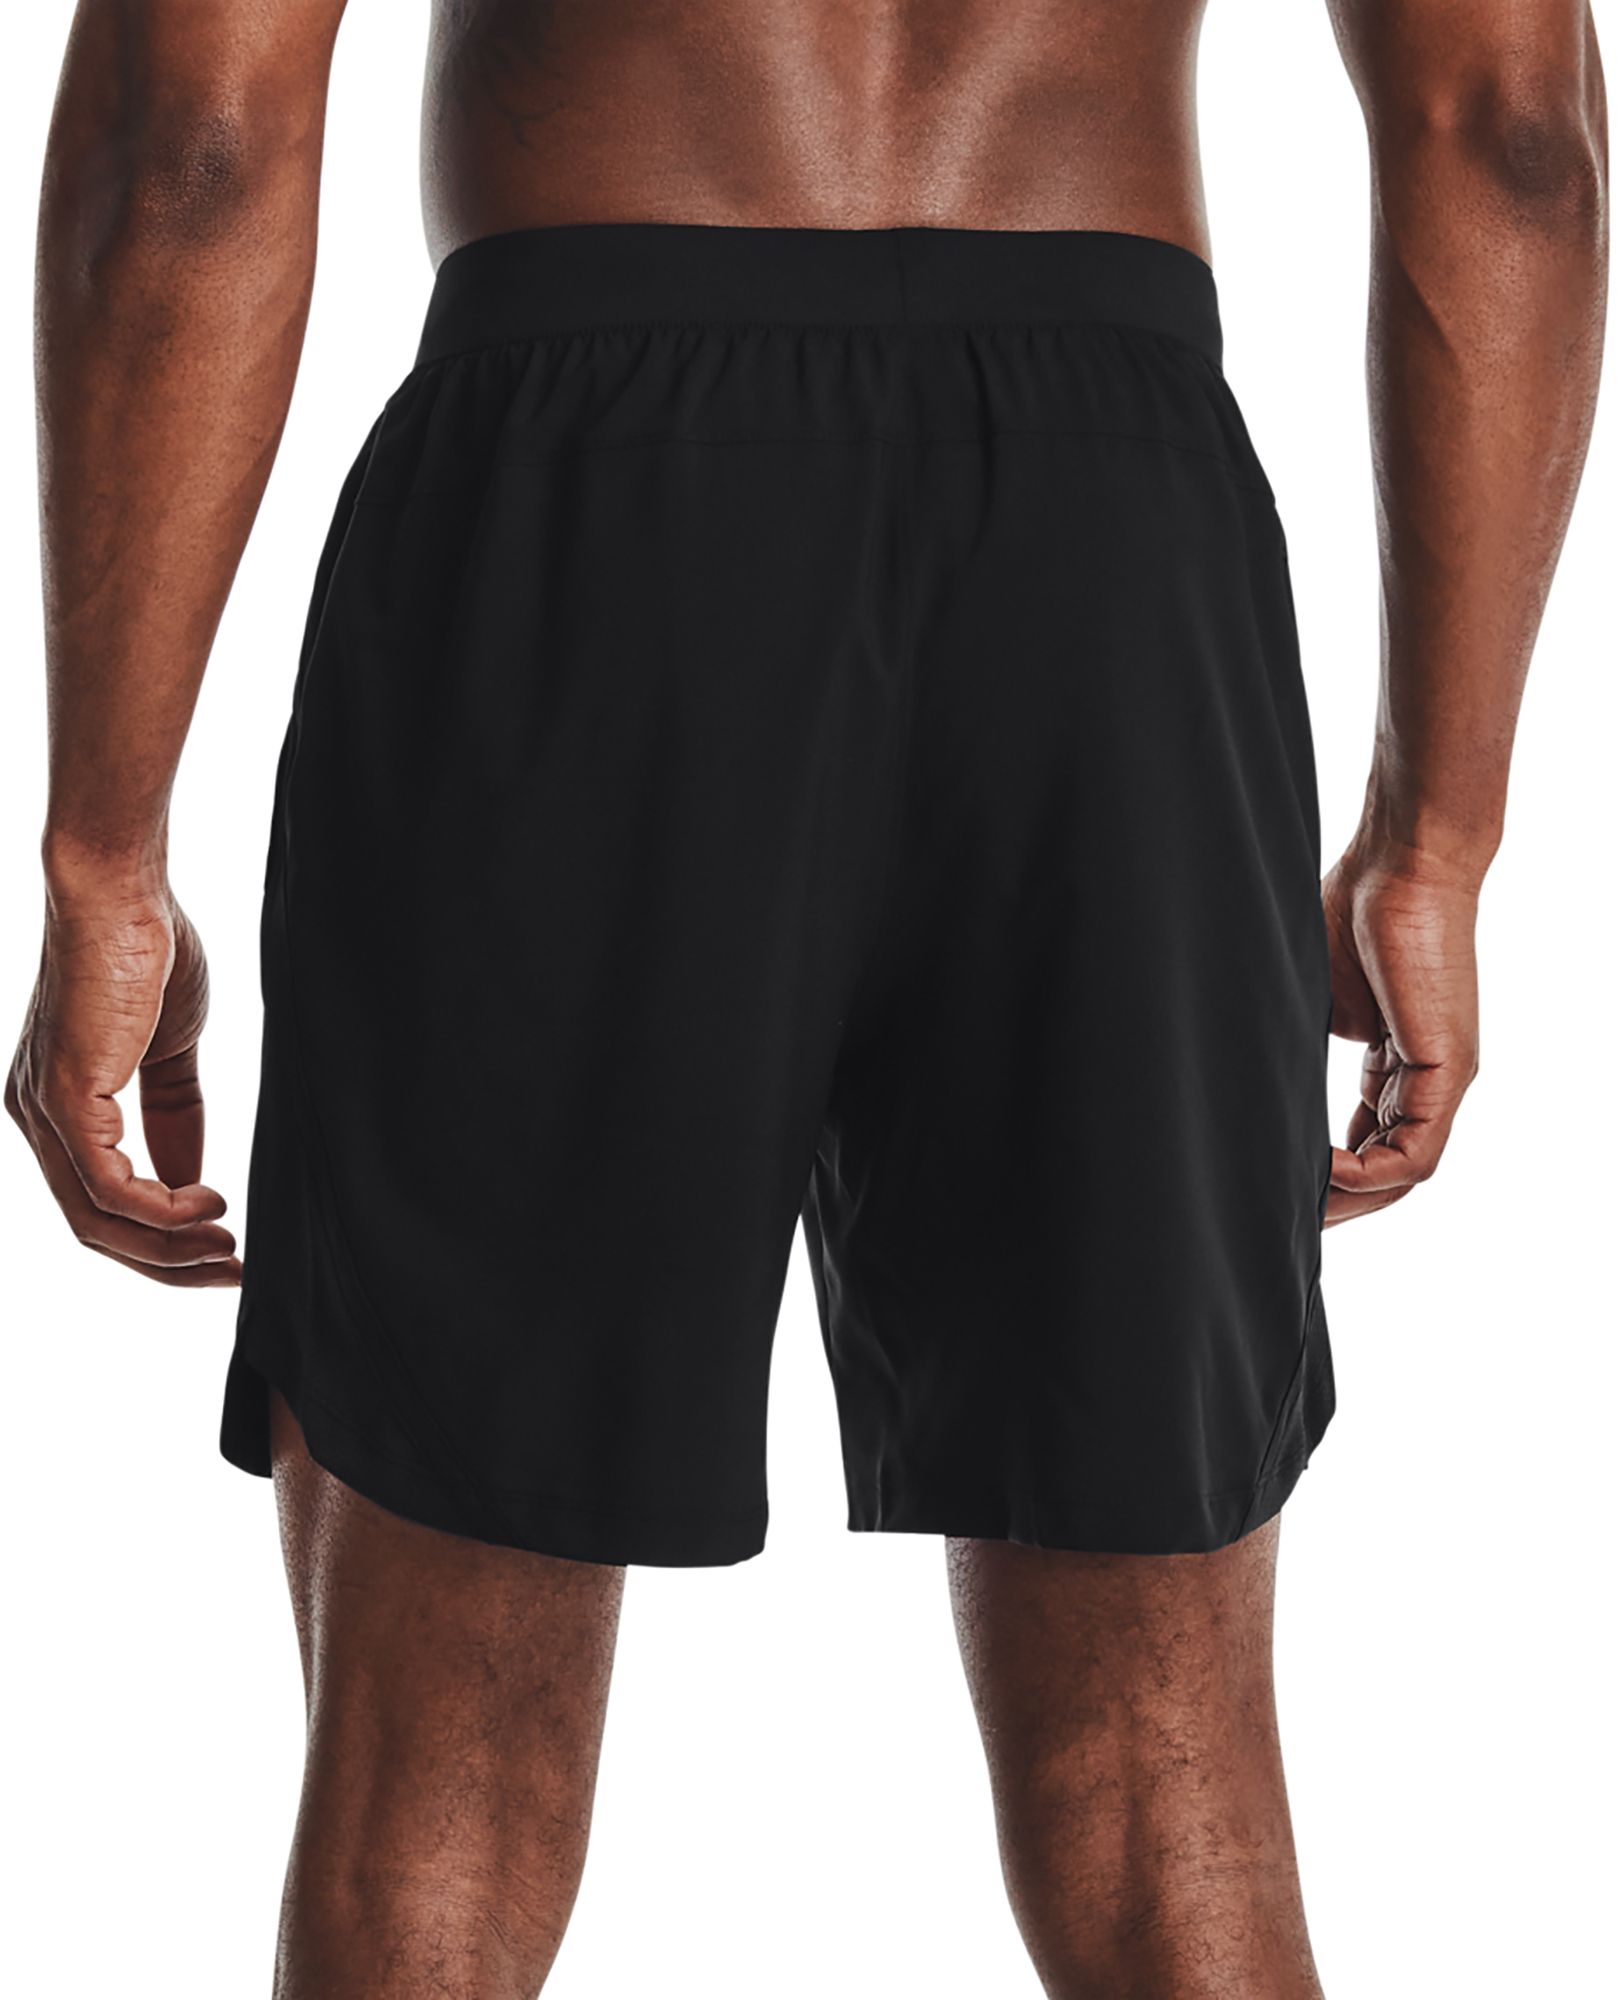 Under Armour Men's Launch 7” Stretch Woven Shorts